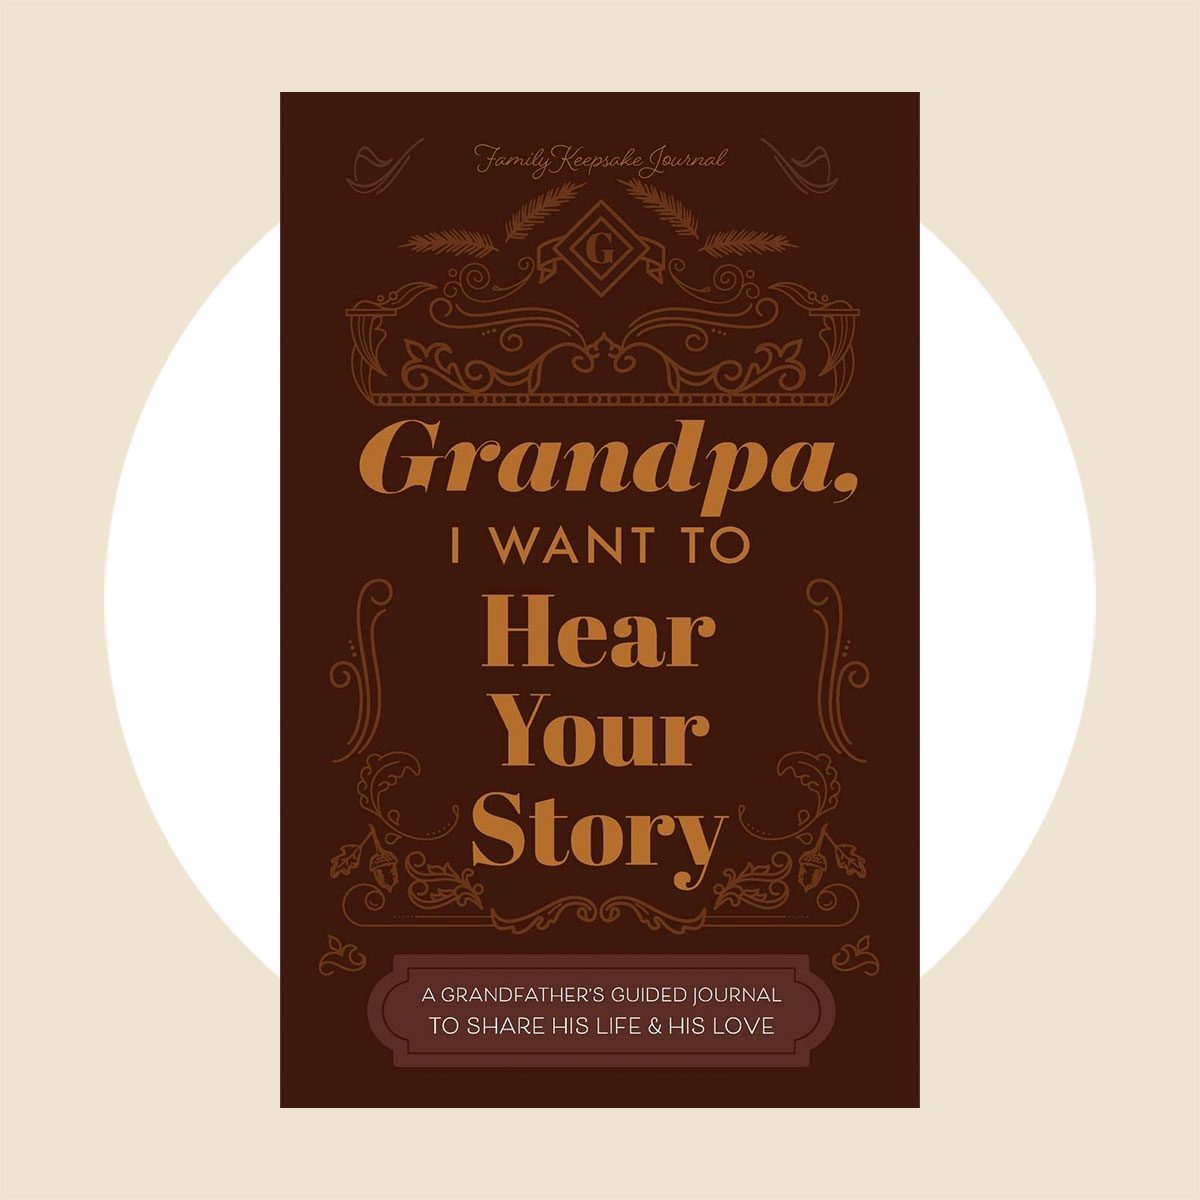 Toh Ecomm Grandfather, I Want To Hear Your Story A Grandfather's Guided Journal To Share His Life And His Love Via Amazon.com